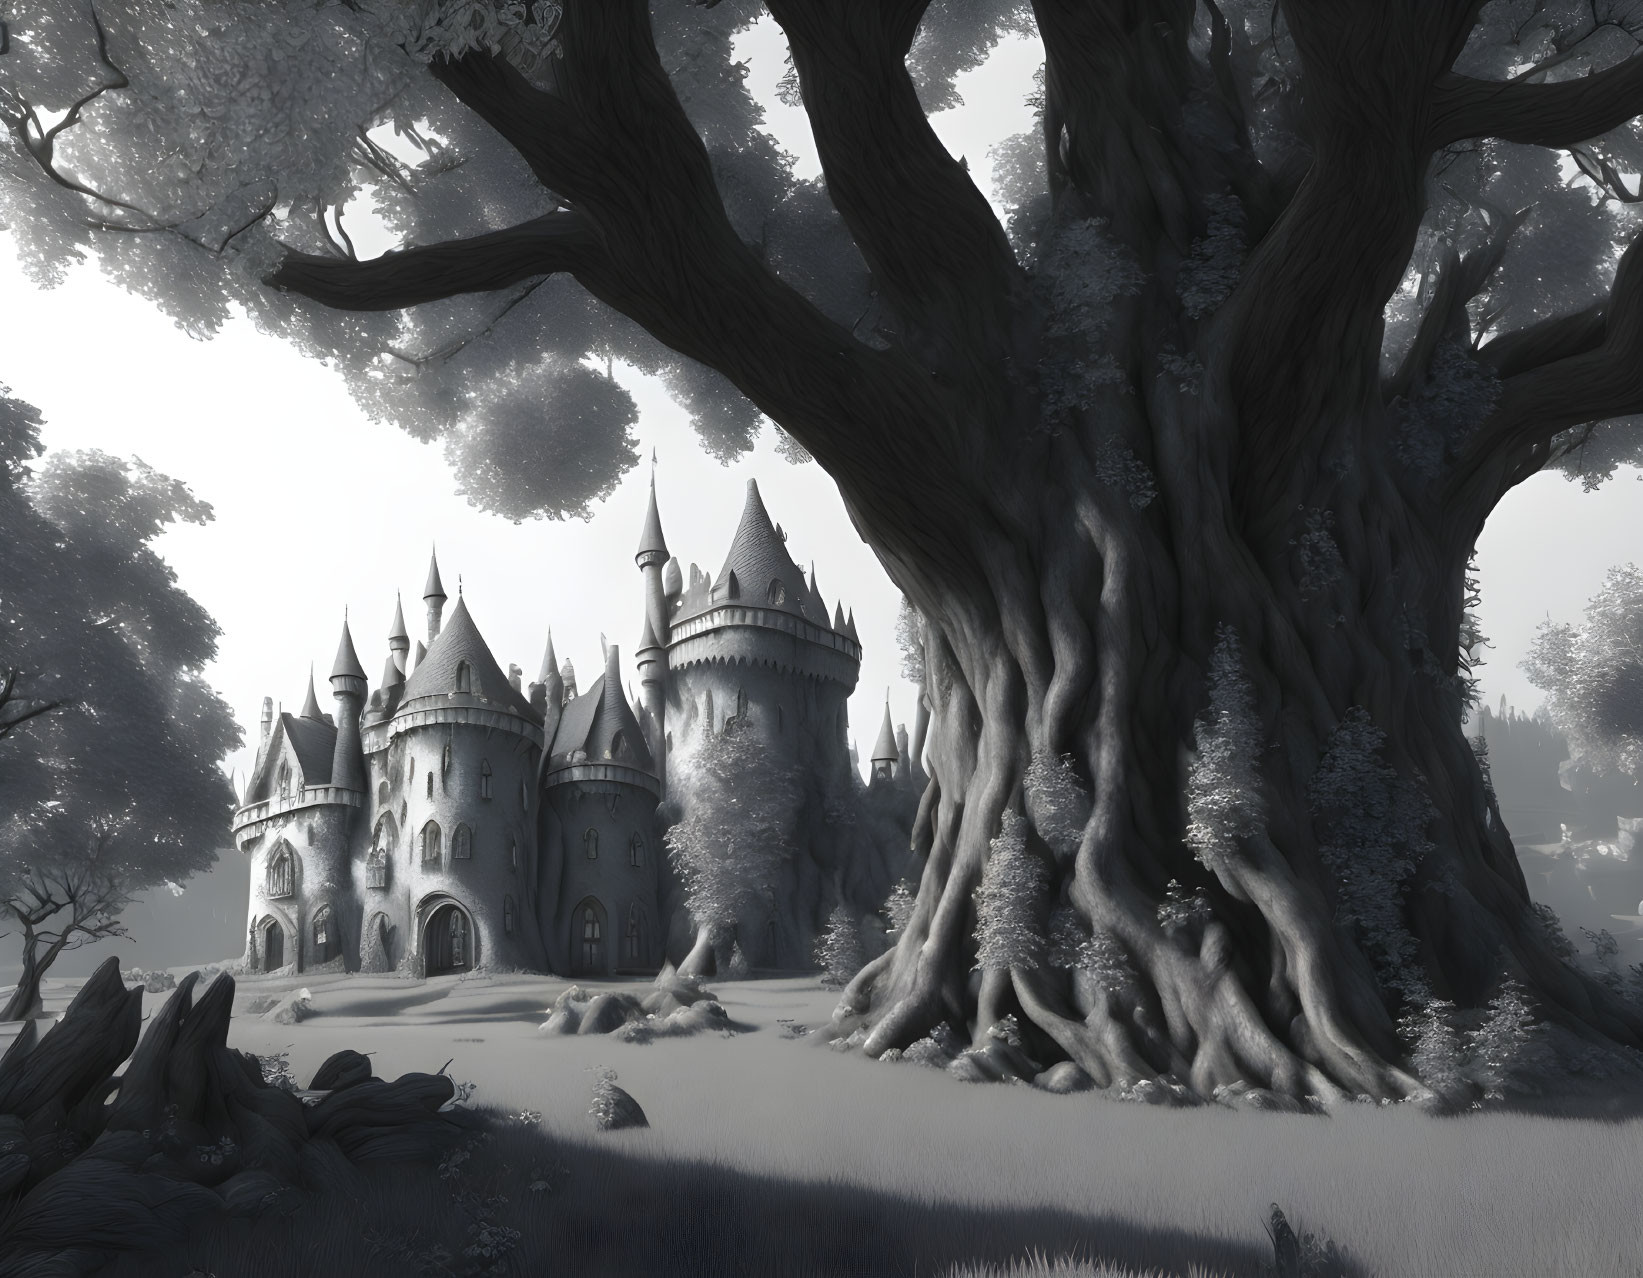 Monochromatic castle nestled in mystical forest with ancient tree